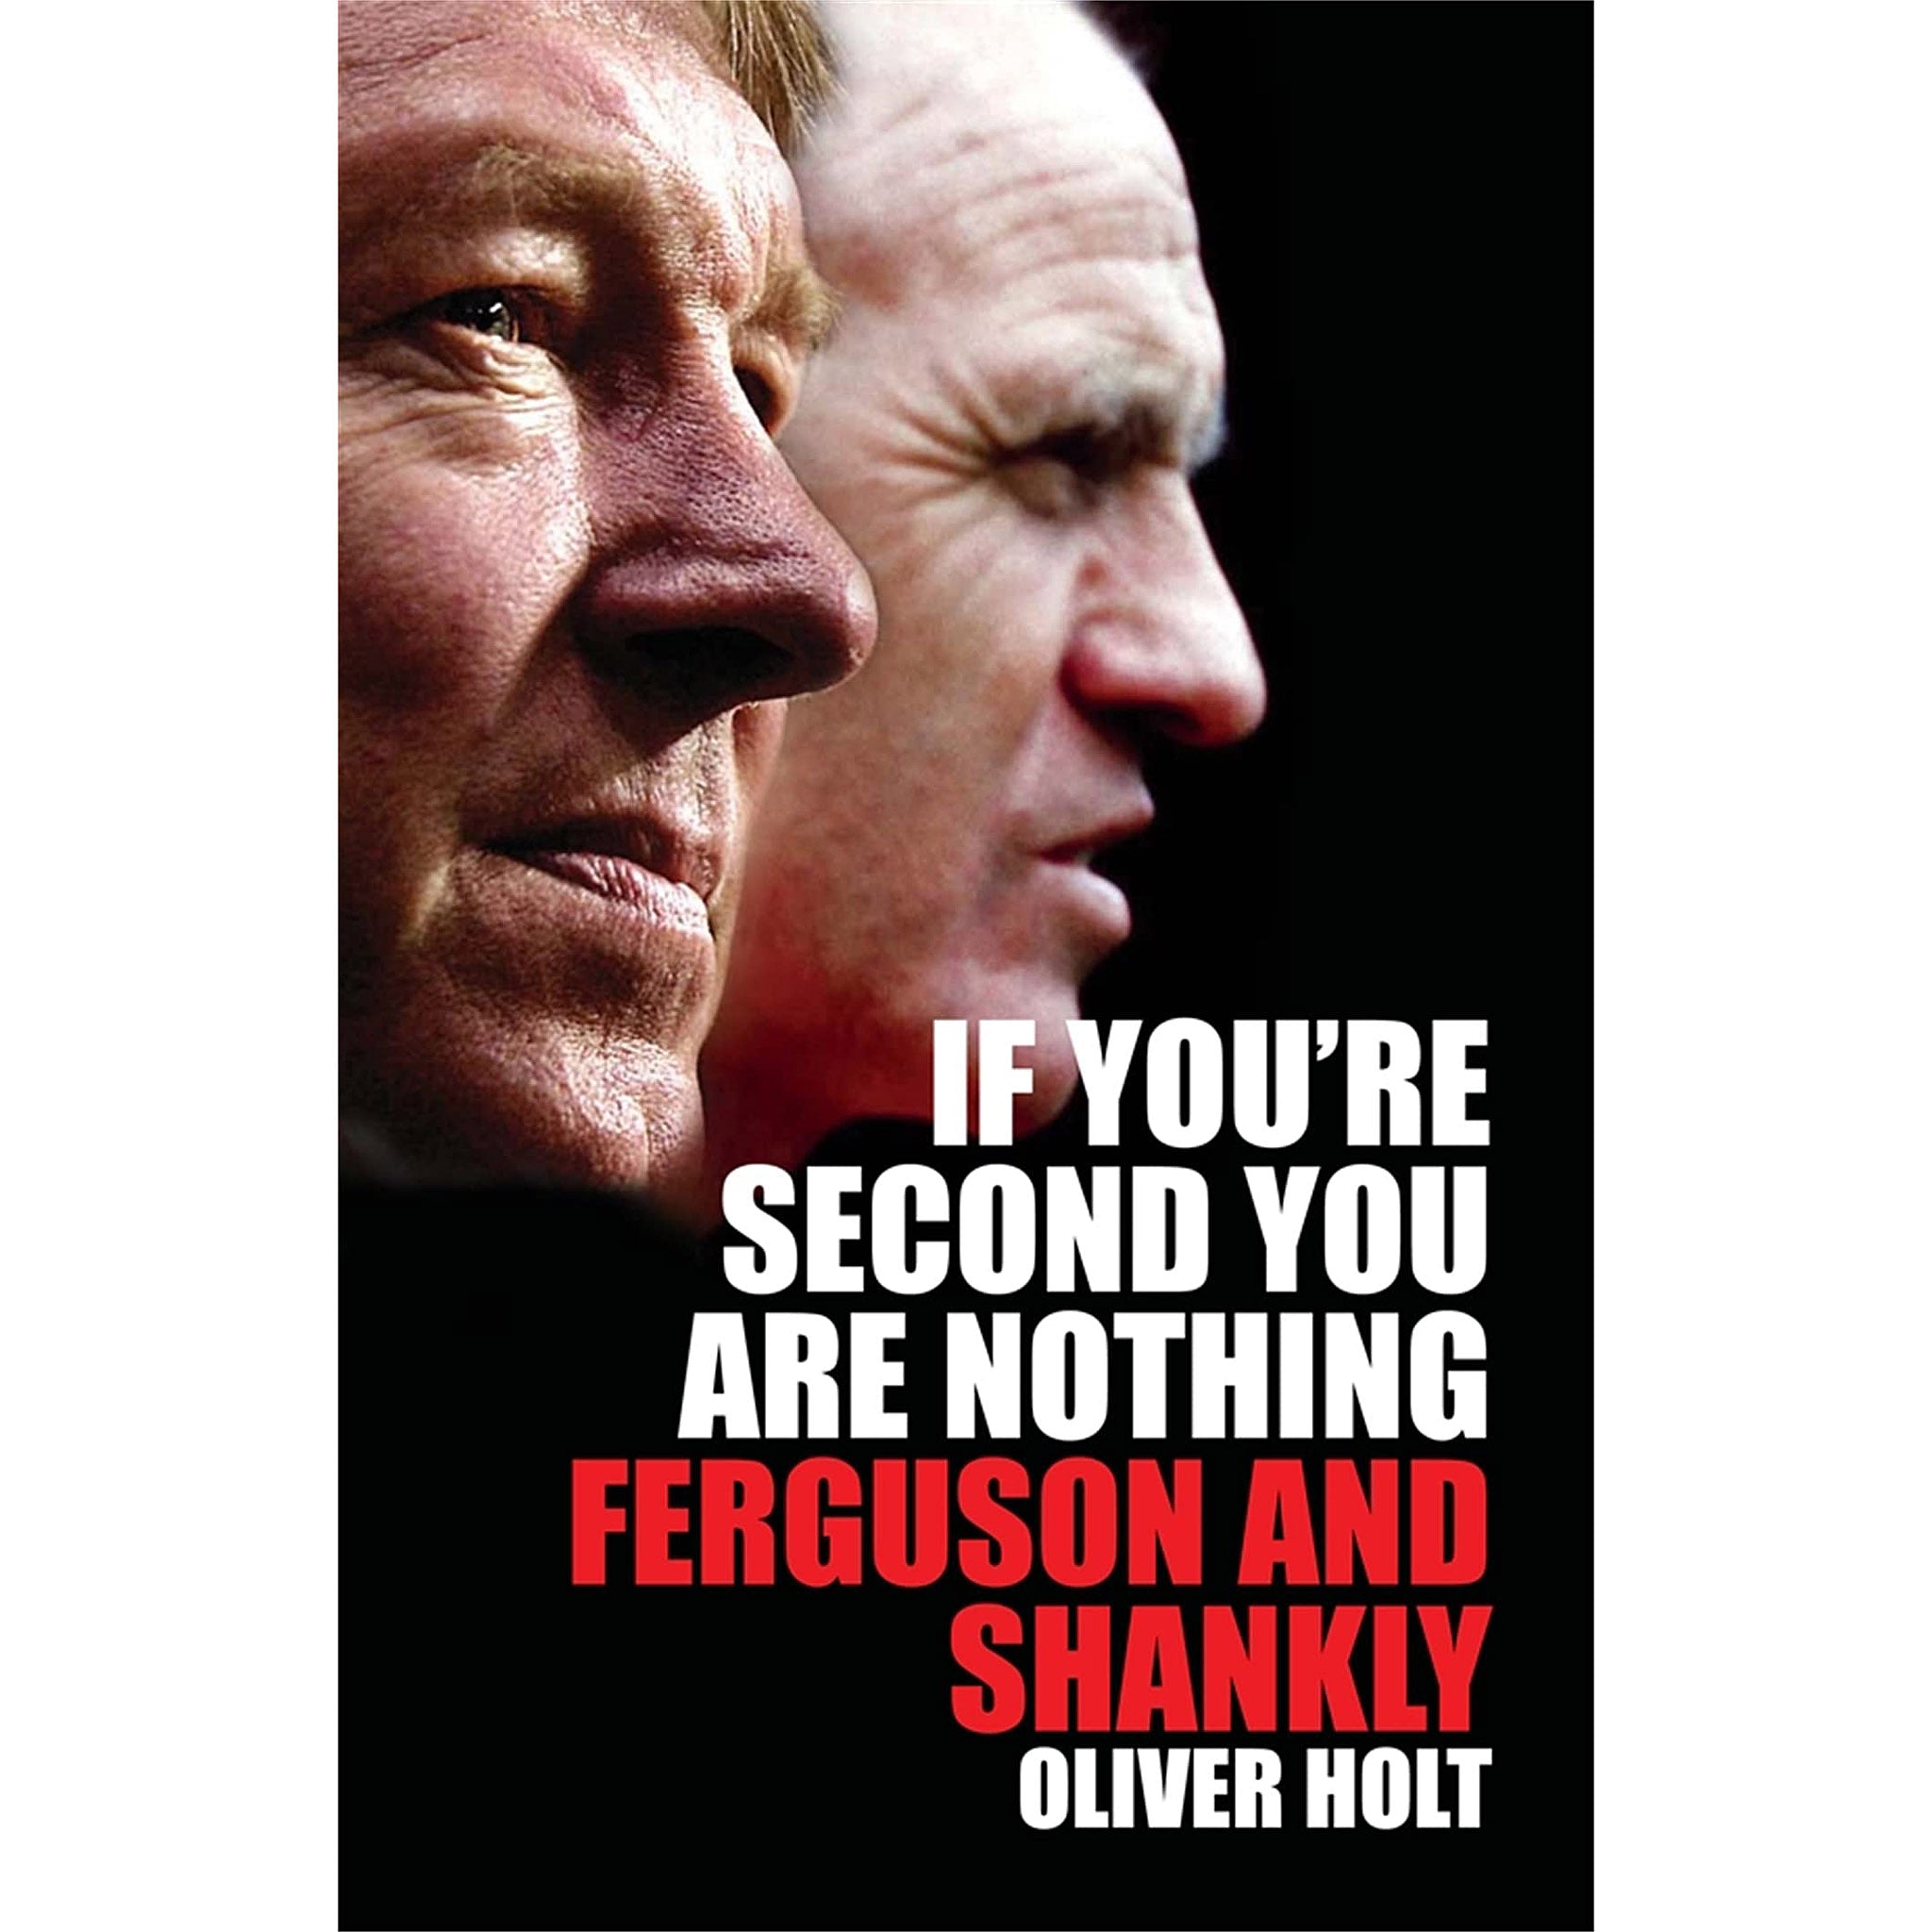 If You're Second You Are Nothing – Ferguson and Shankly